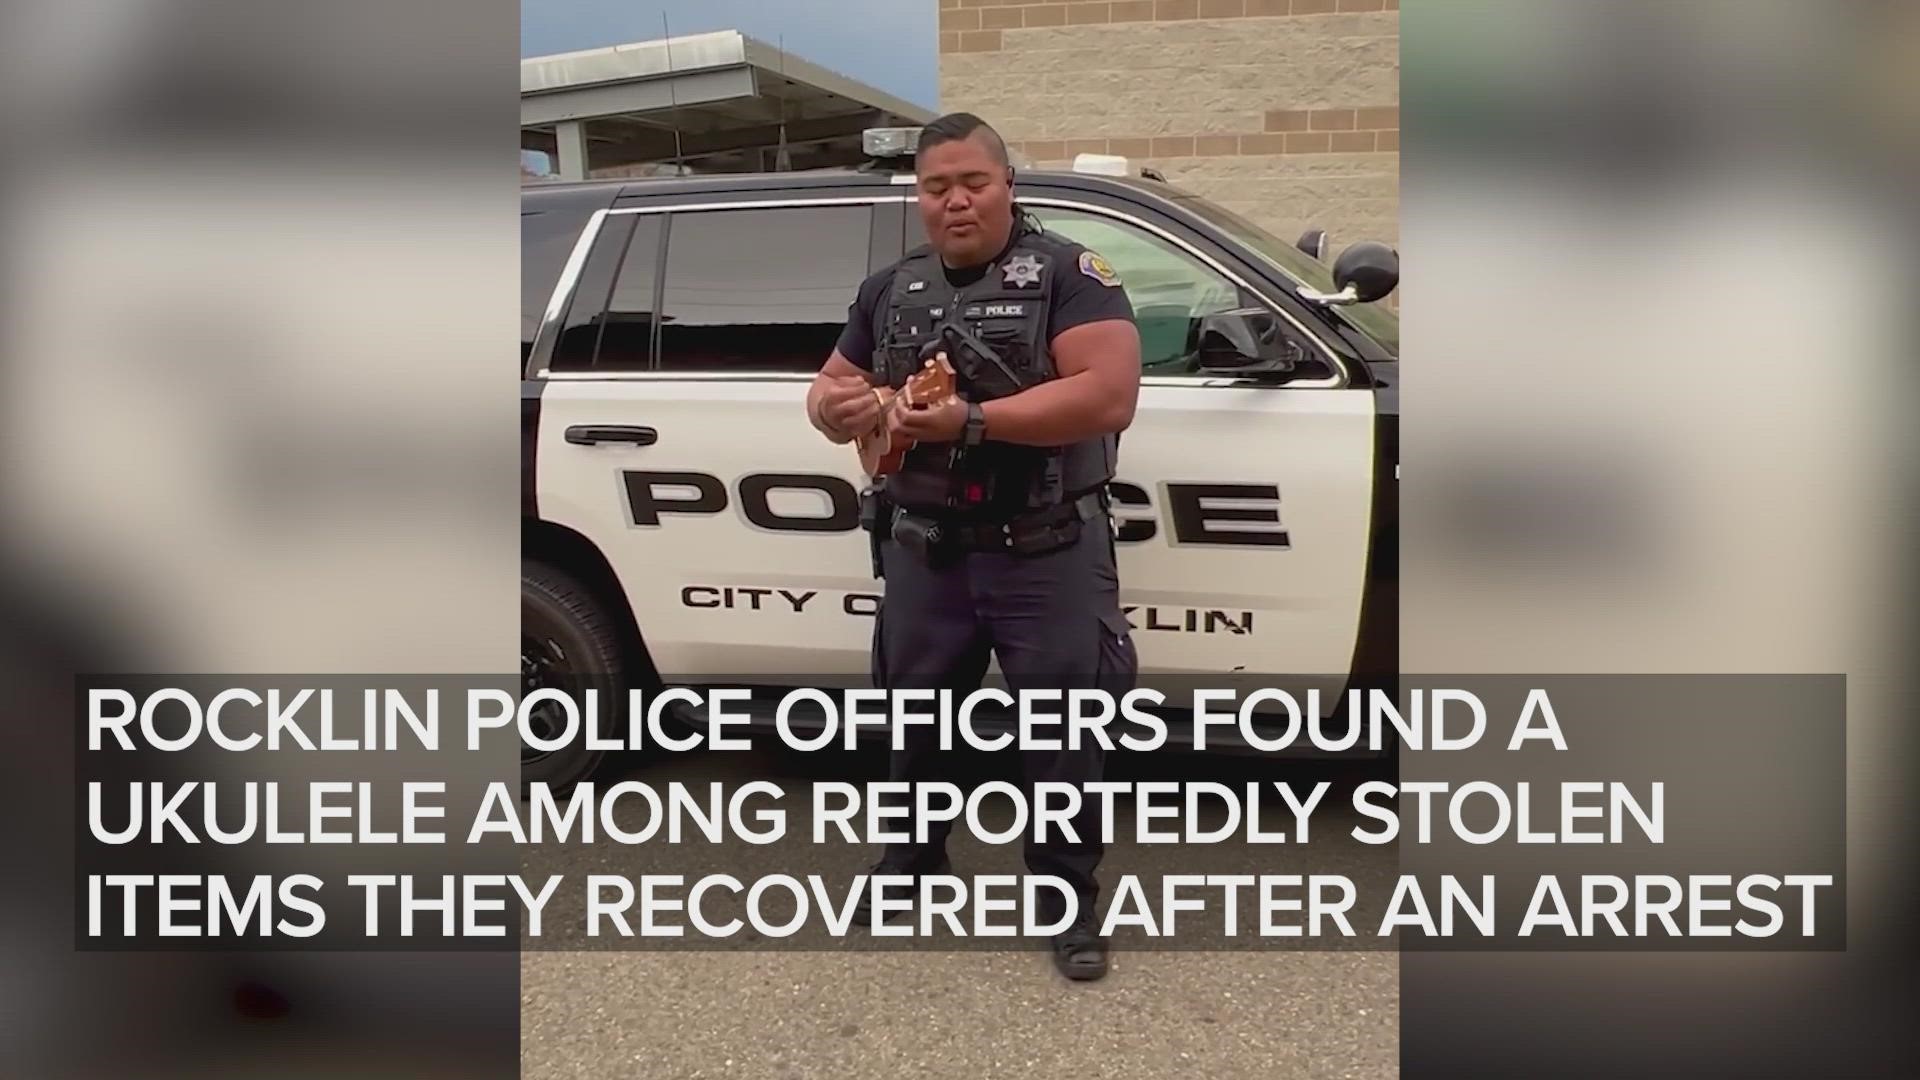 In a video released by the police department, officer Guillermo plays the ukulele after finding it among items recovered from a suspected burglar they arrested.